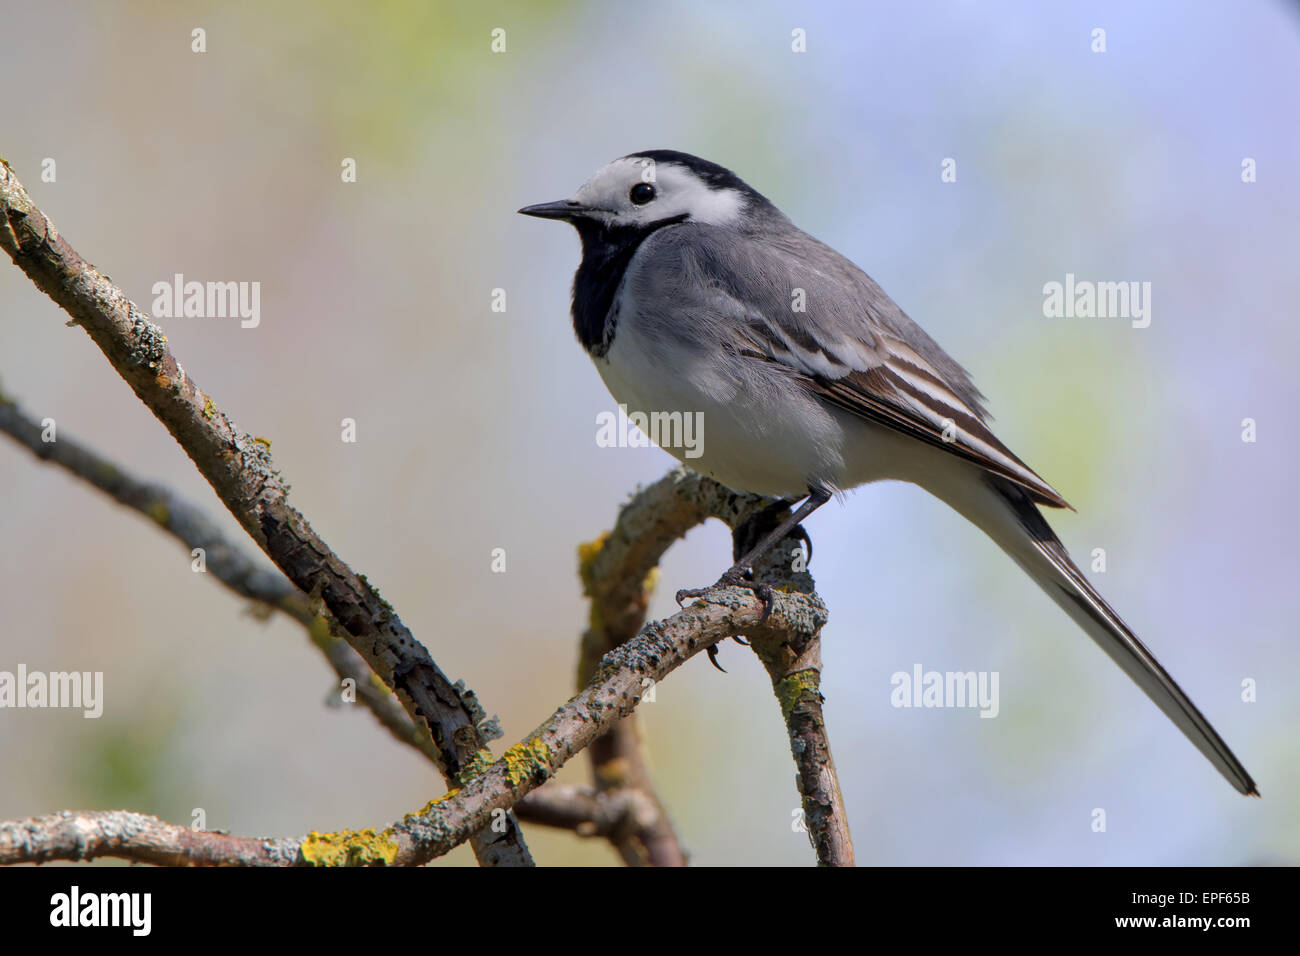 White wagtail (Motacilla alba) is a small passerine bird in the wagtail family Motacillidae, which also includes the pipits and Stock Photo